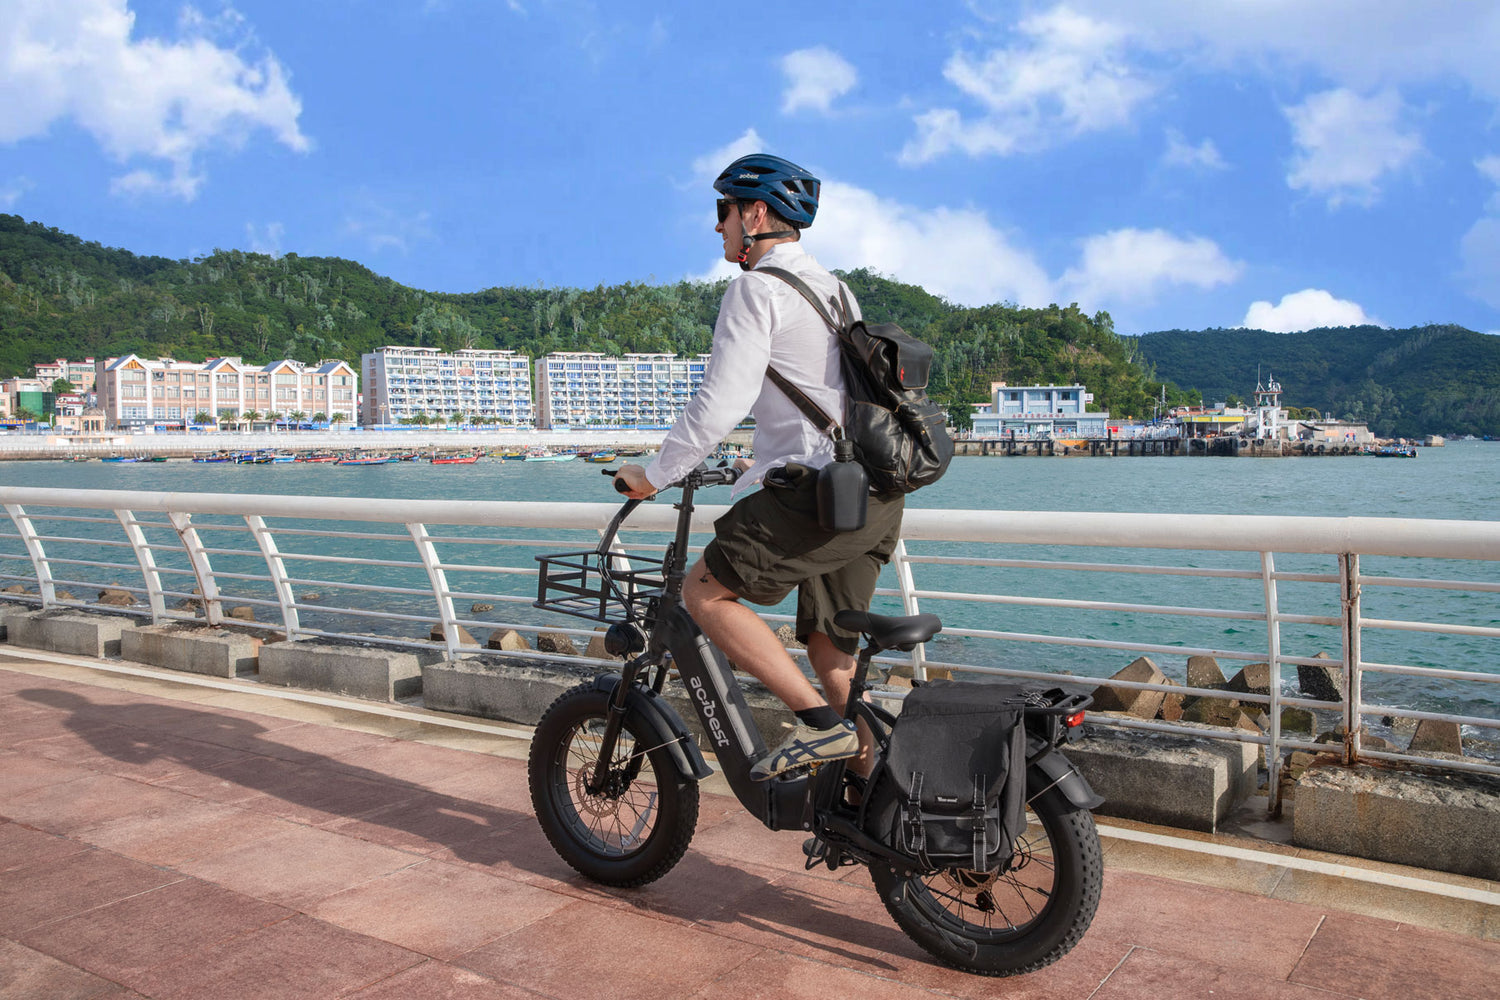 Does riding an electric bike require a driver's license?